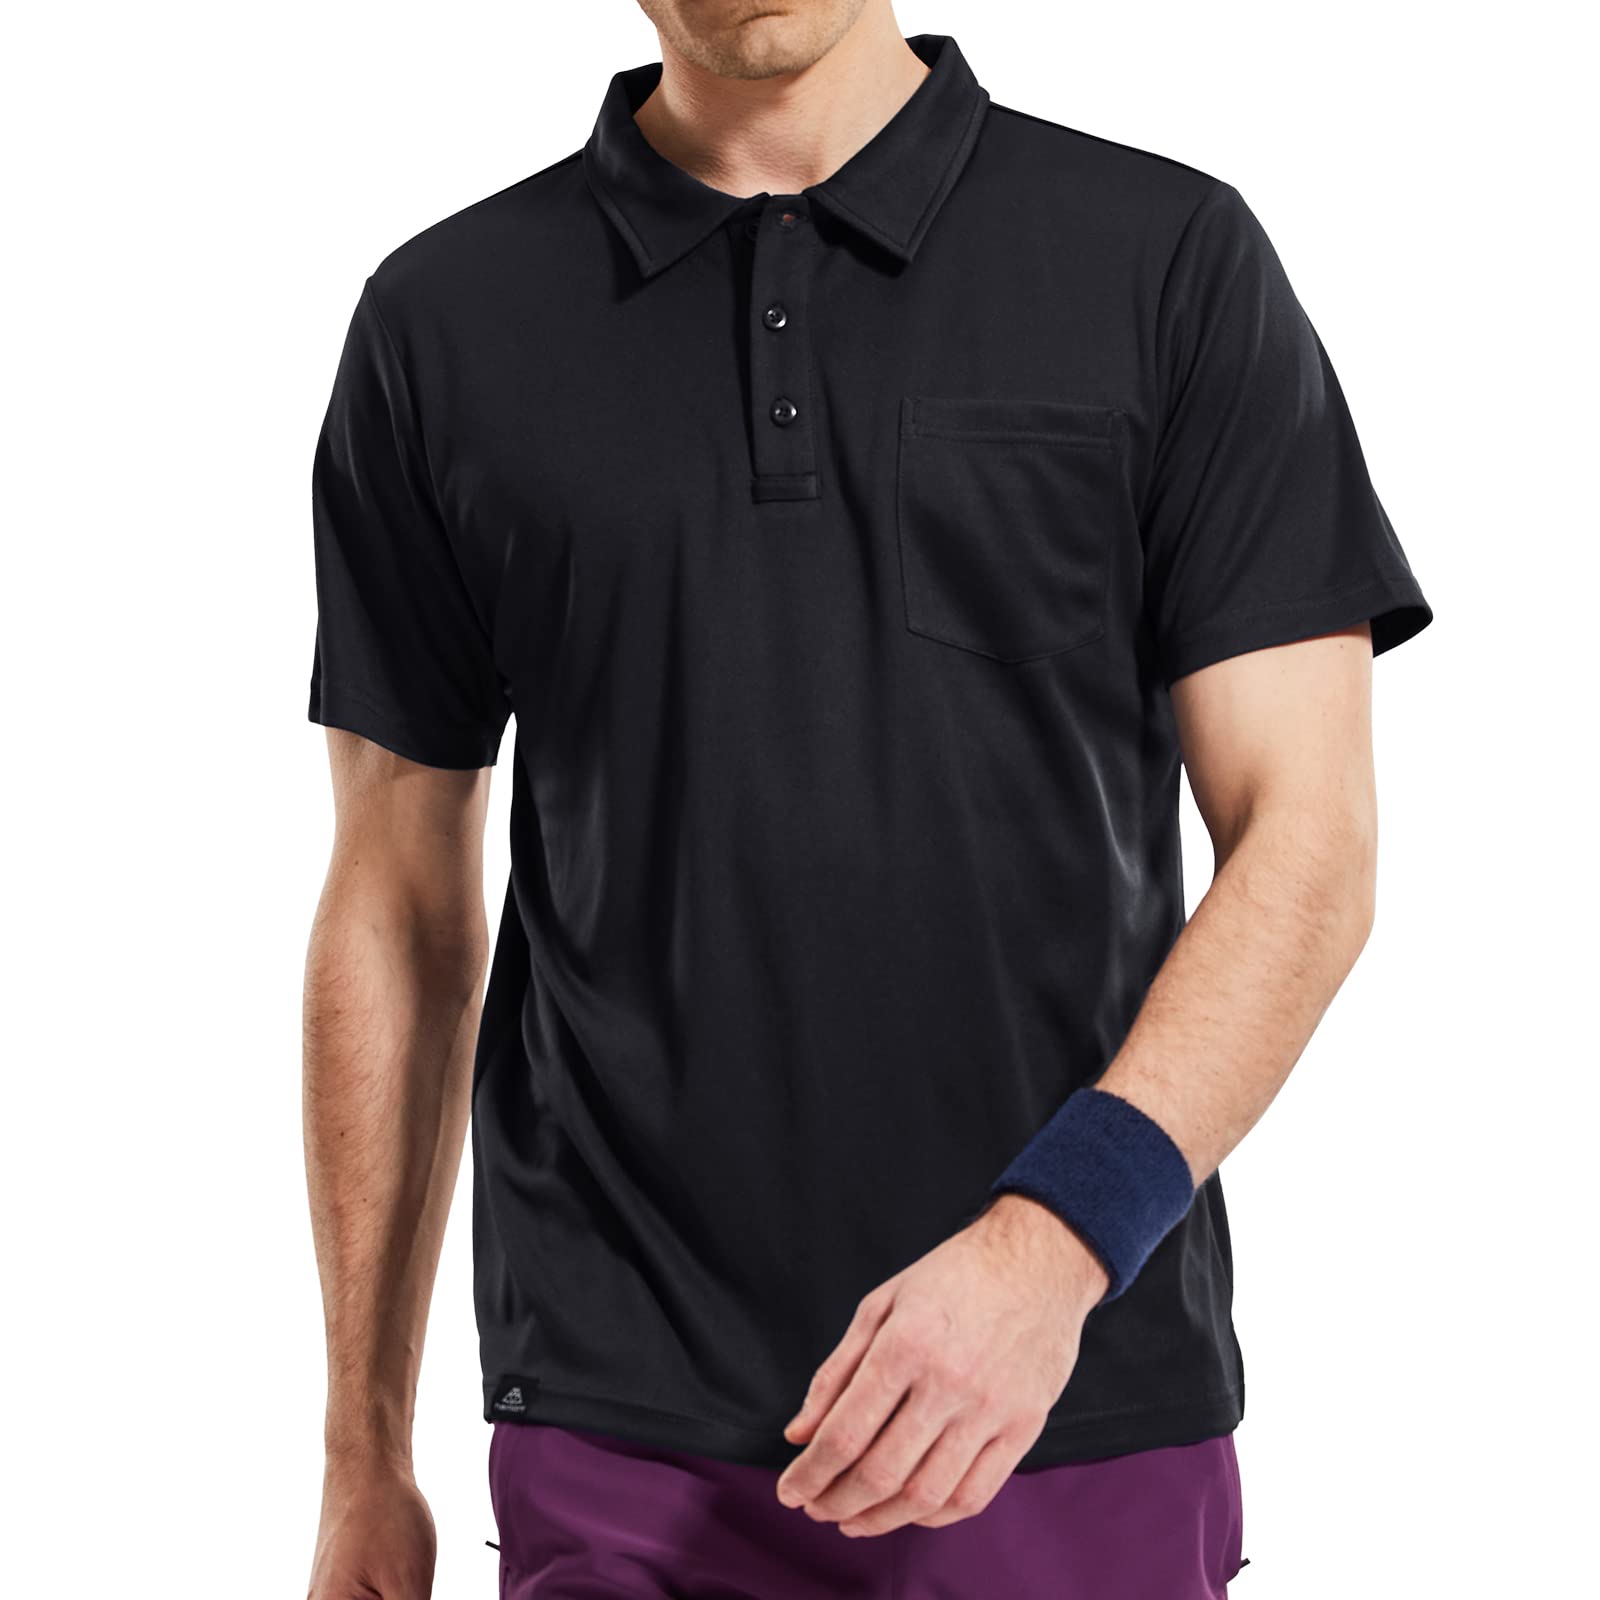 Haimont Long Sleeve Cotton Polo Shirts for Men Soft Golf Shirts with Collar - 3